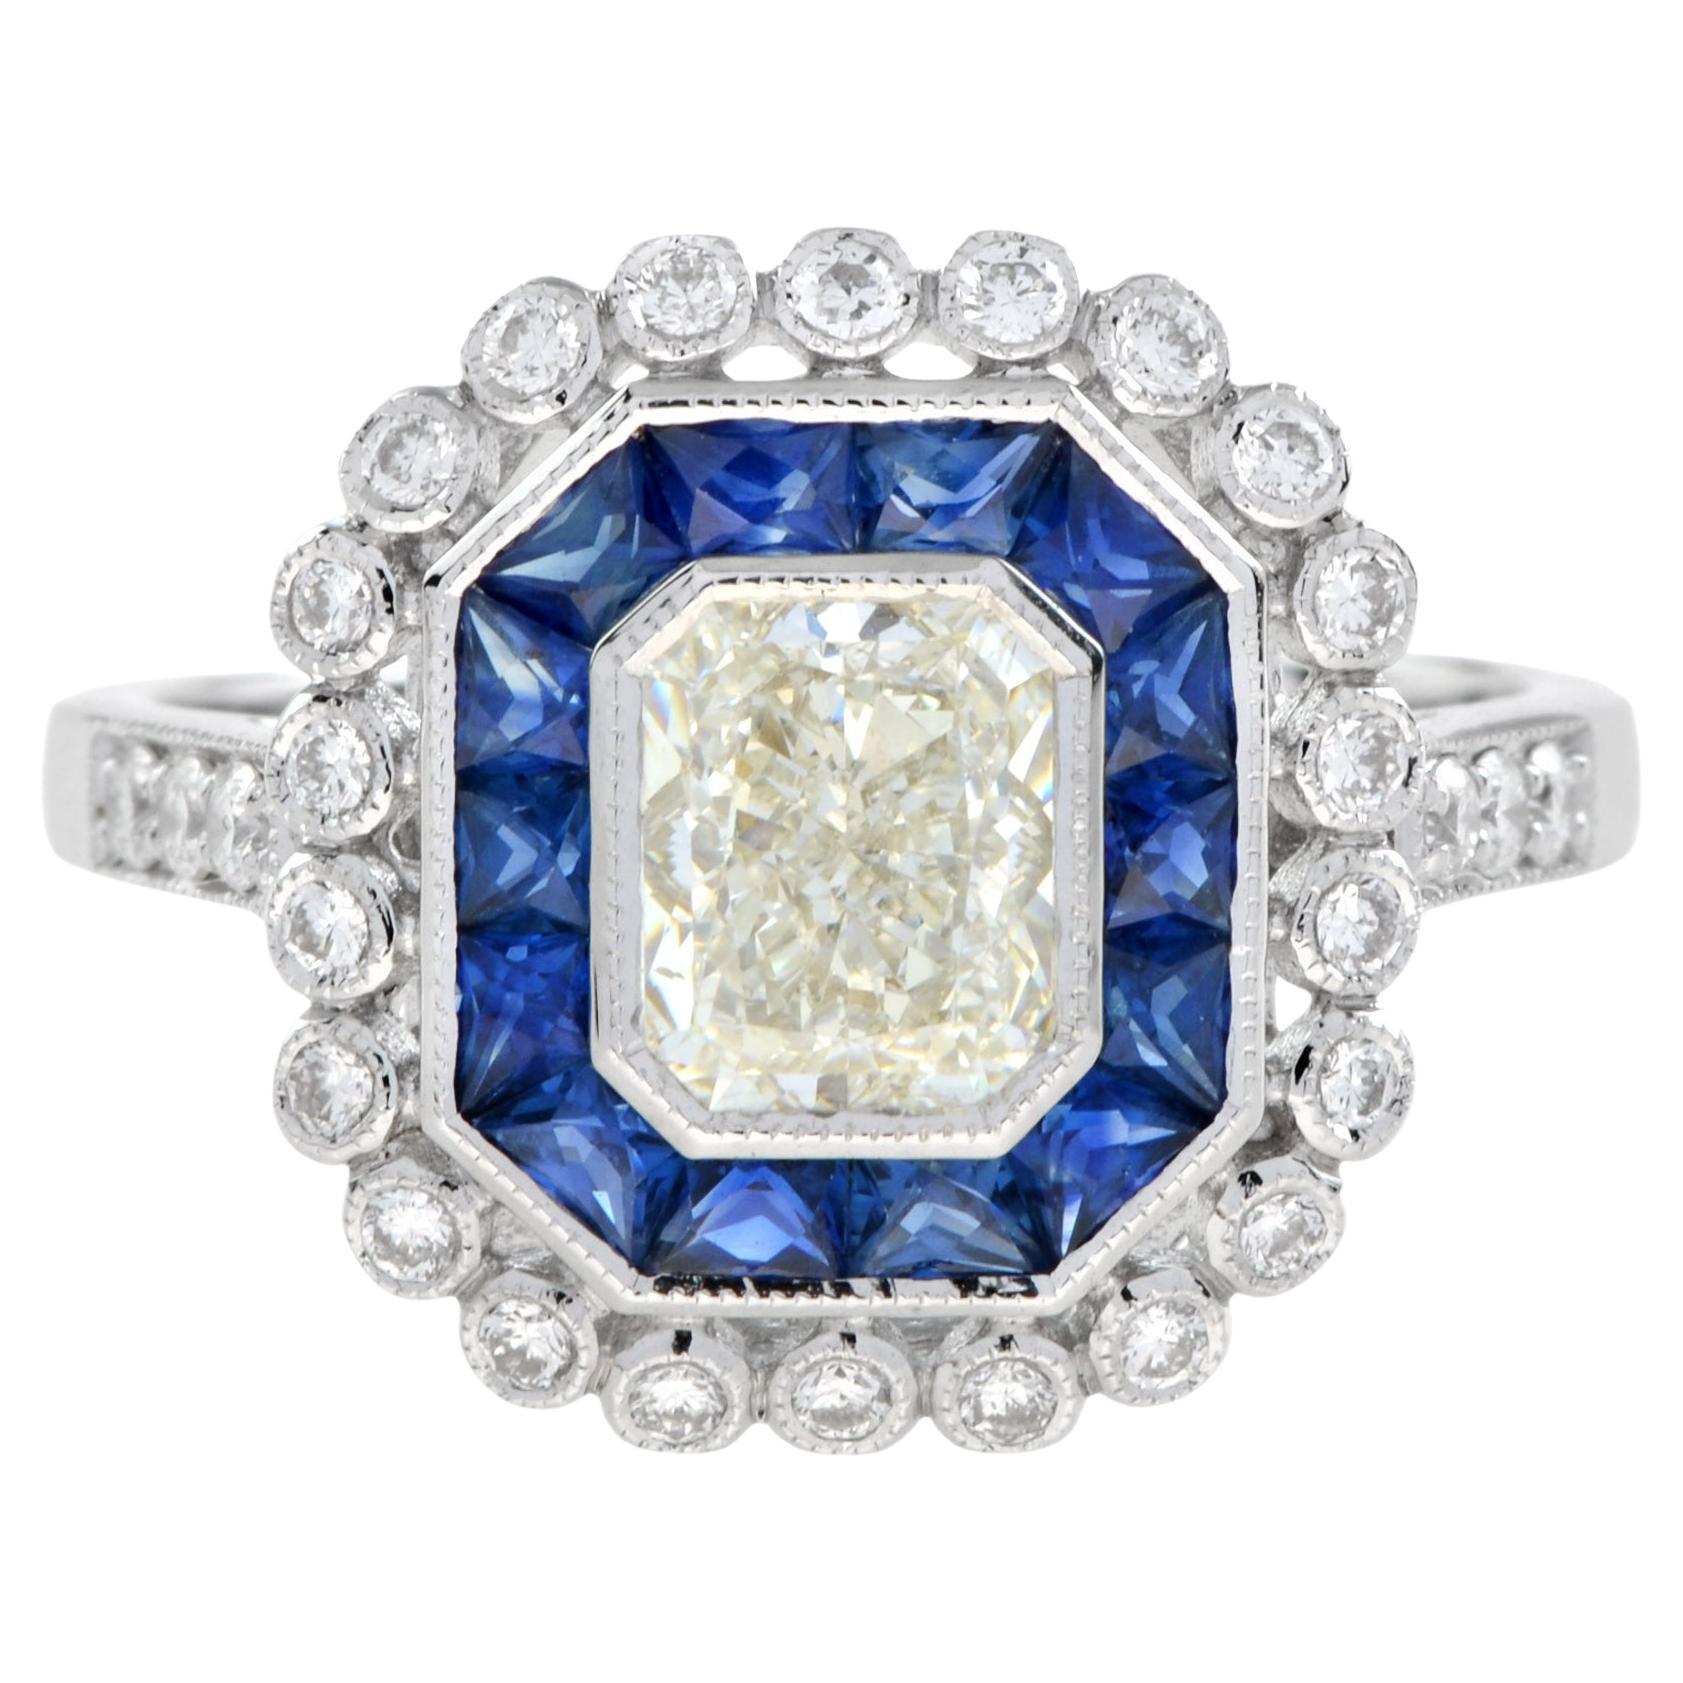 GIA 1.04 Ct. Diamond Sapphire Art Deco Style Engagement Ring in 18K White Gold